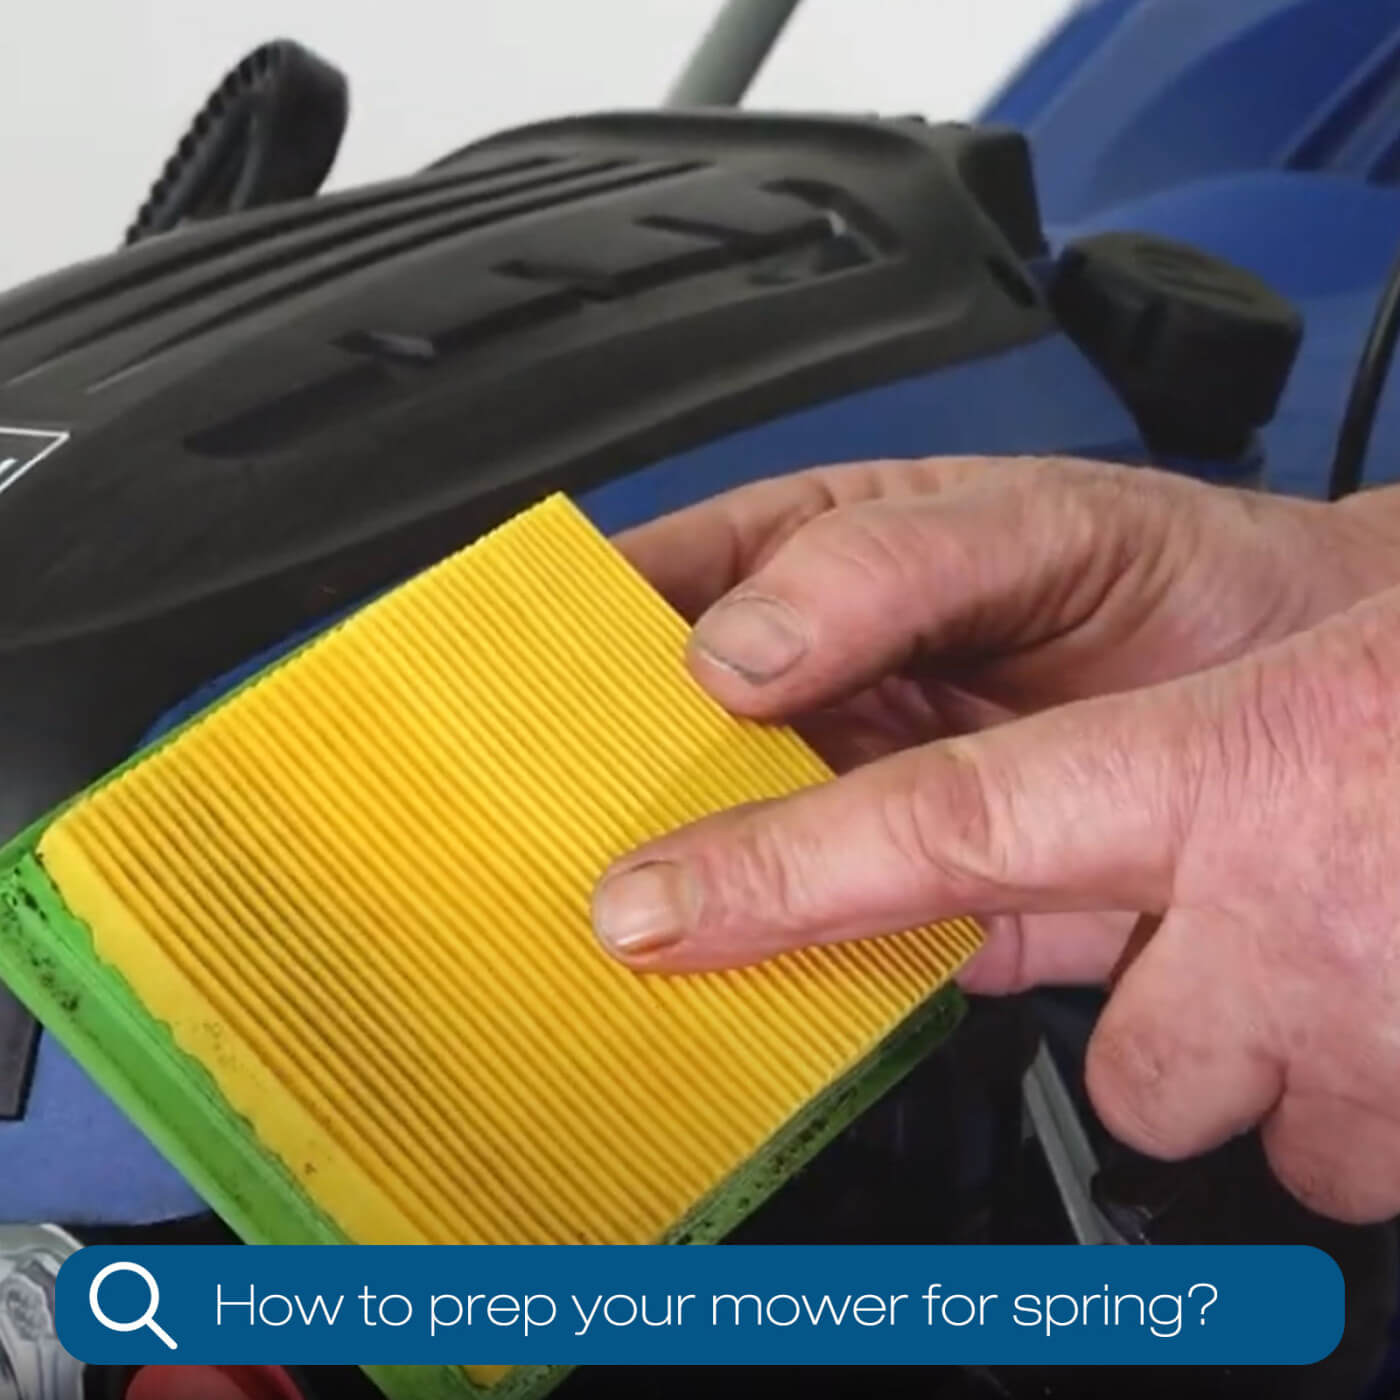 7 Tips for Preparing Your Lawn Mower for Spring 2023